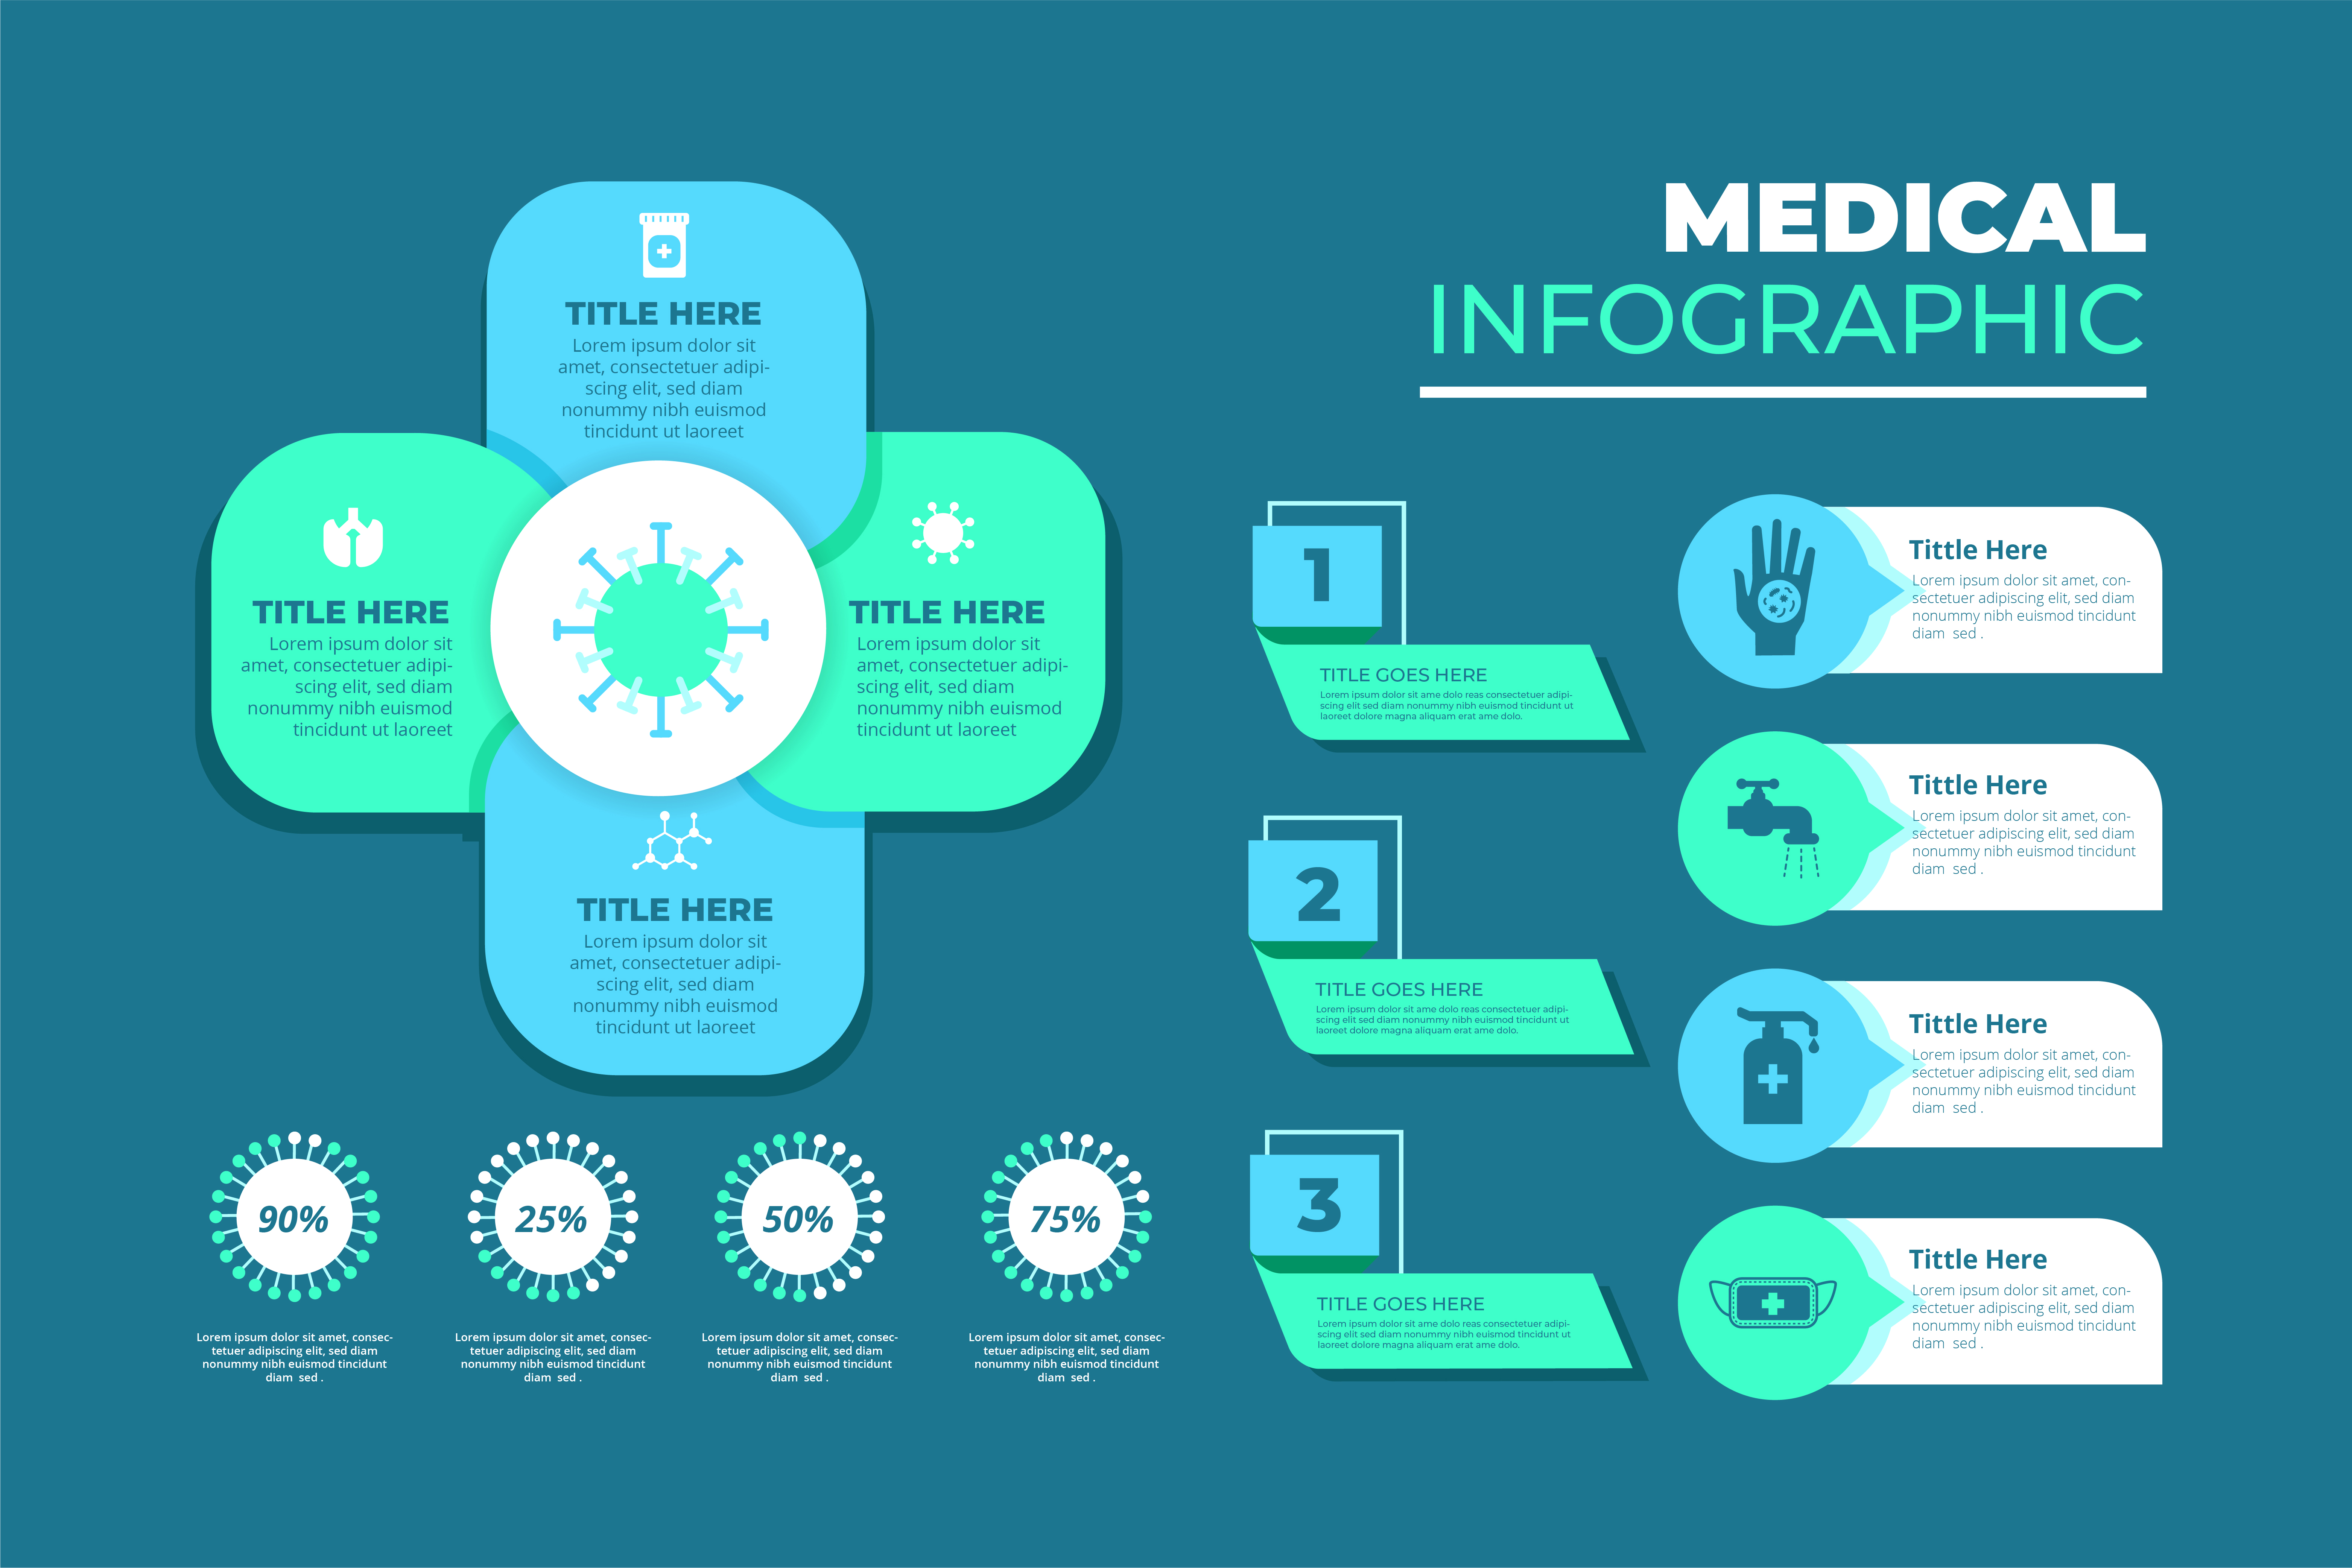 Medical infographic template Download Free Vectors, Clipart Graphics